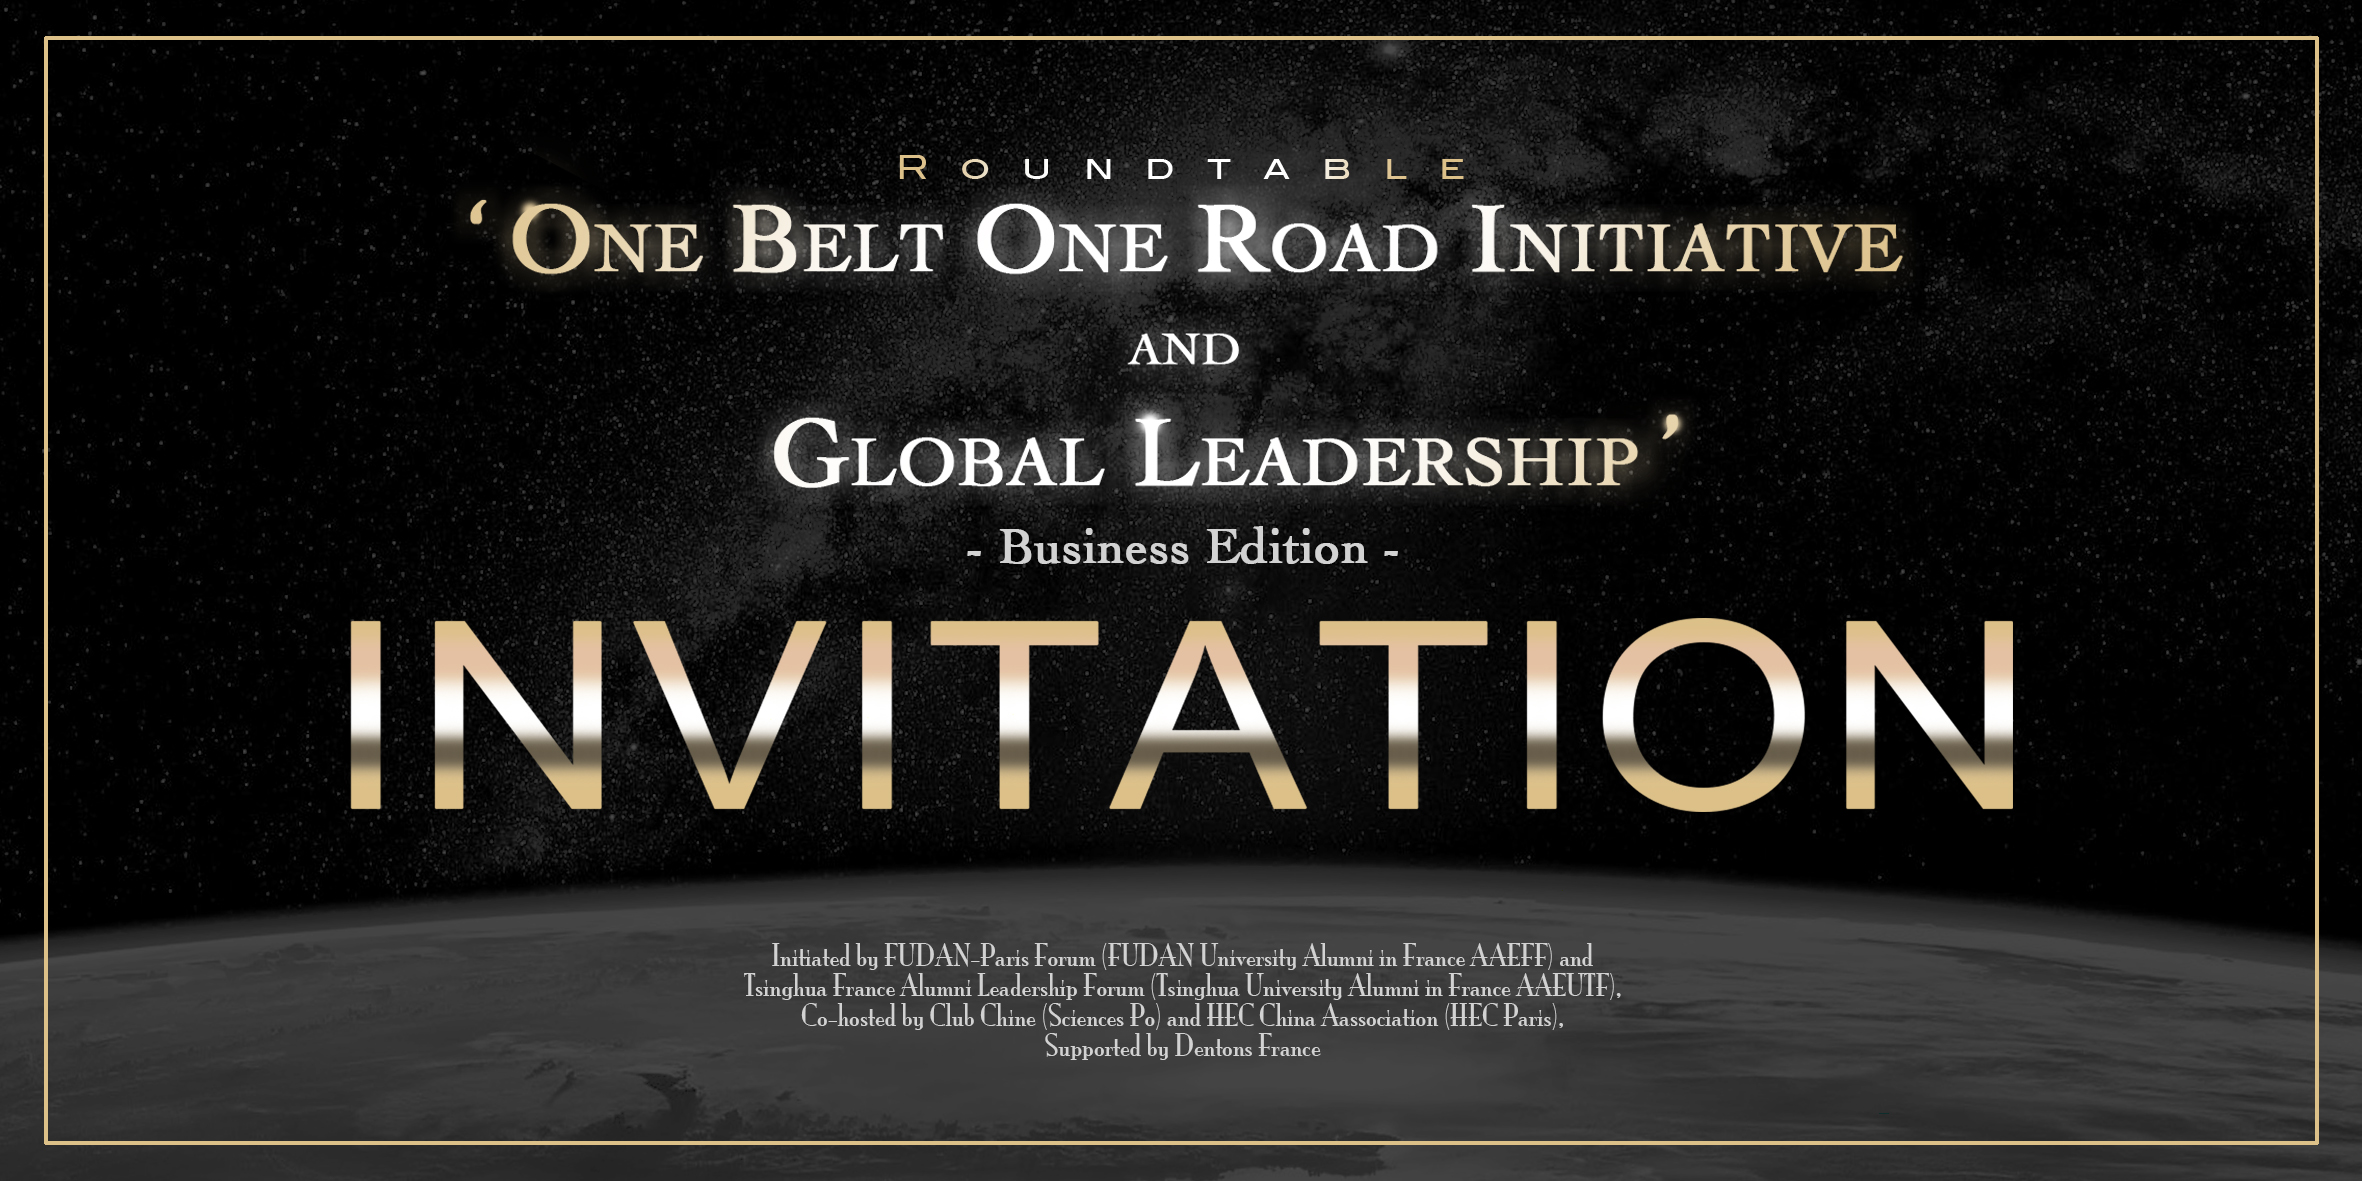 The First edition of Series of Roundtables “One Belt One Road Initiative (BRI) and Global Leadership” will be held on March 22, 2018 in Paris.